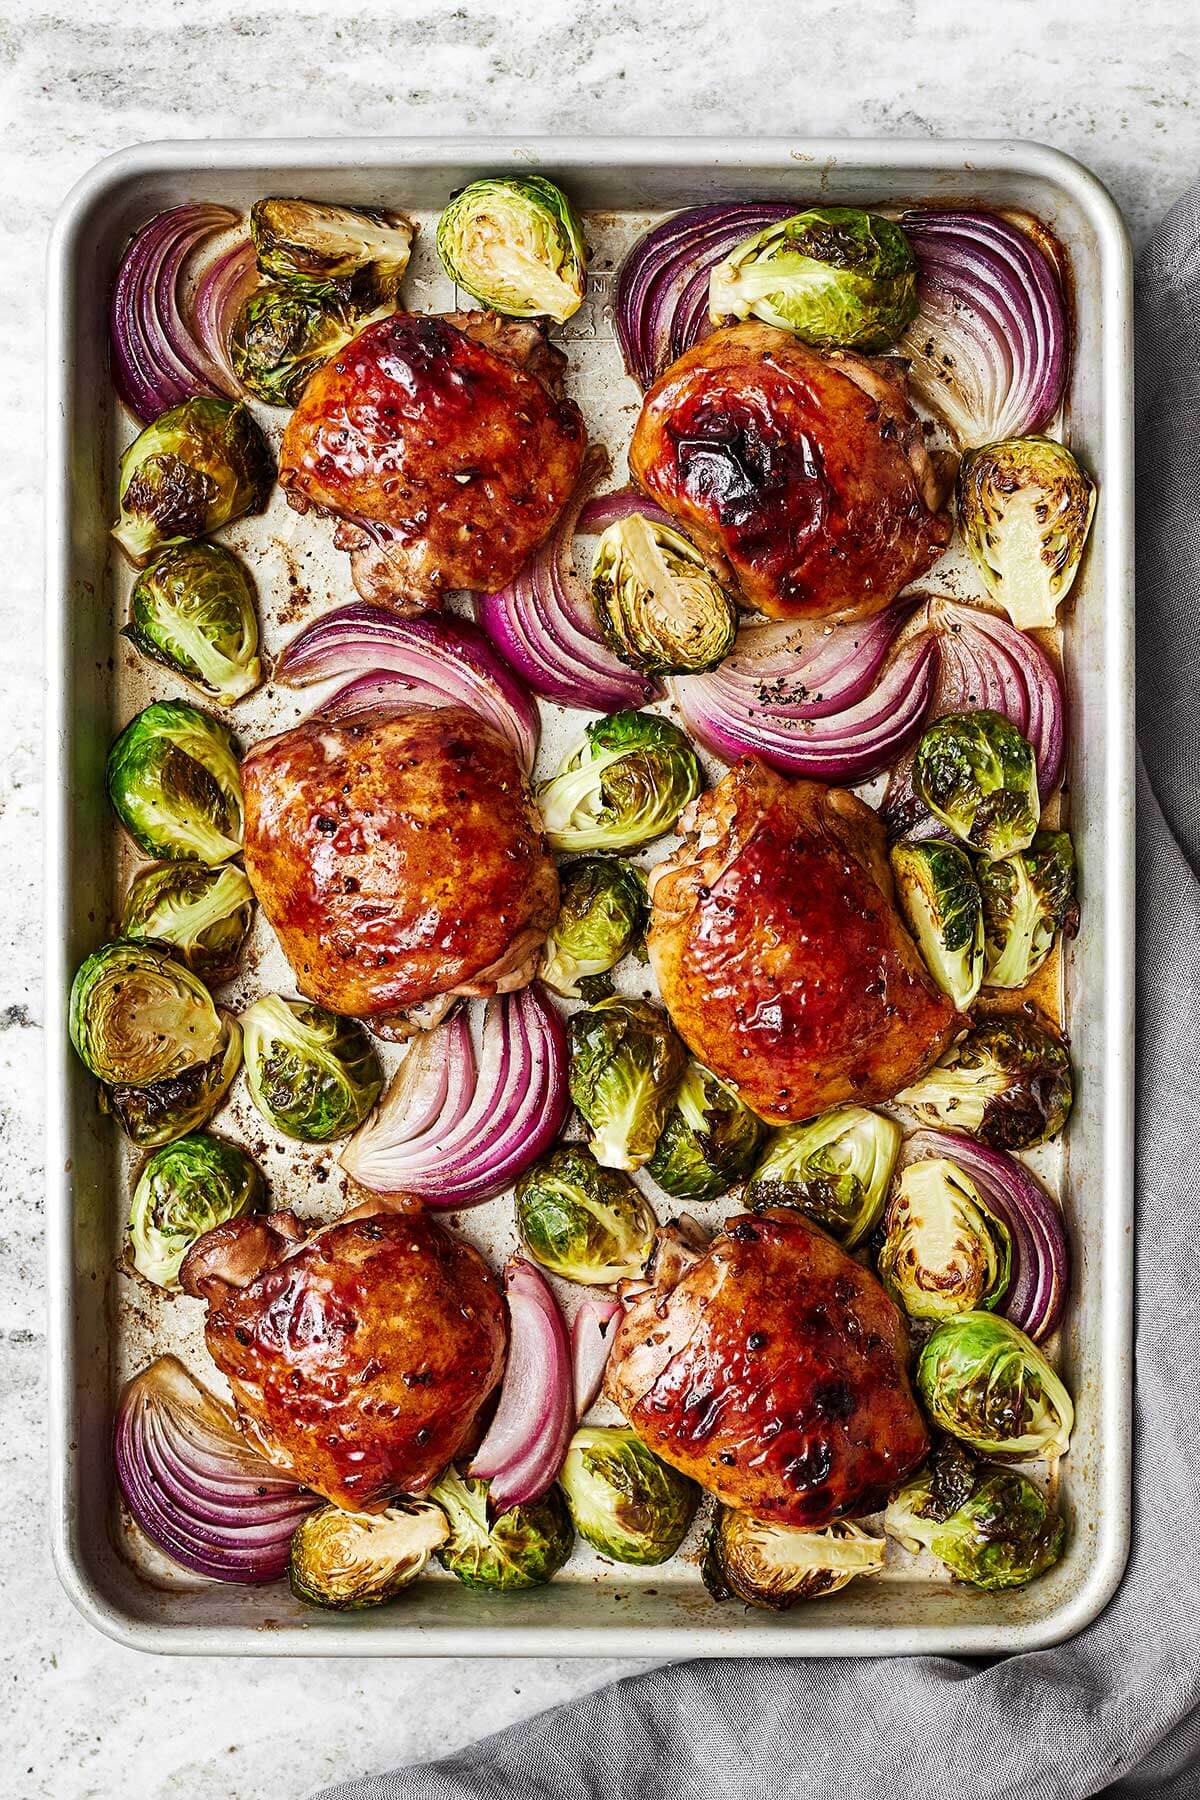 Balsamic chicken and Brussels sprouts on a sheet pan